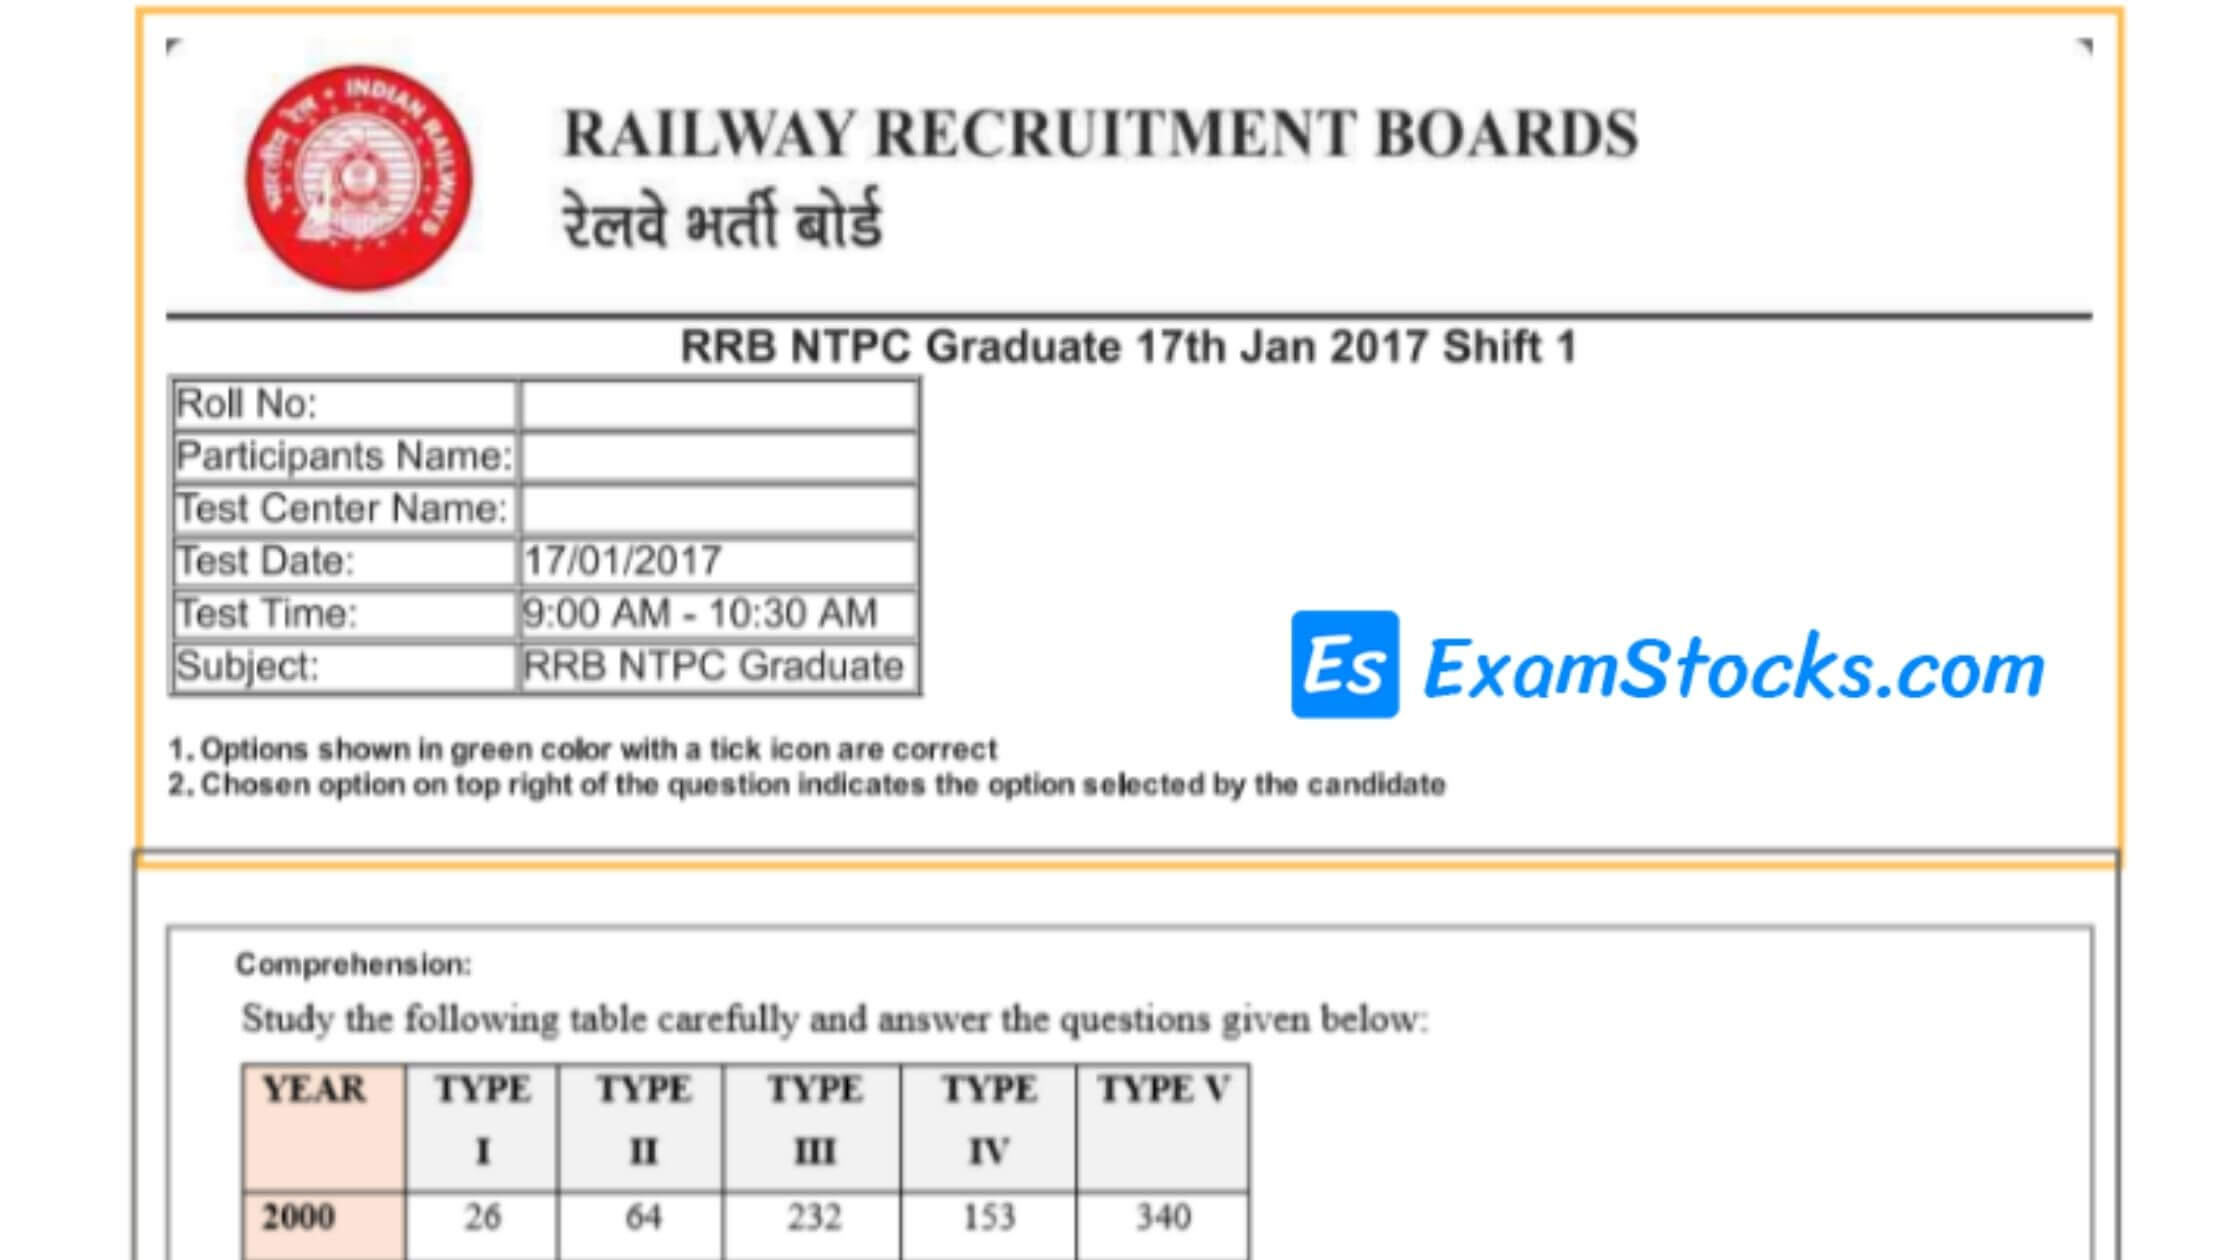 RRB NTPC CBT 2 Previous Year Question Papers PDF All Shifts Exam Stocks